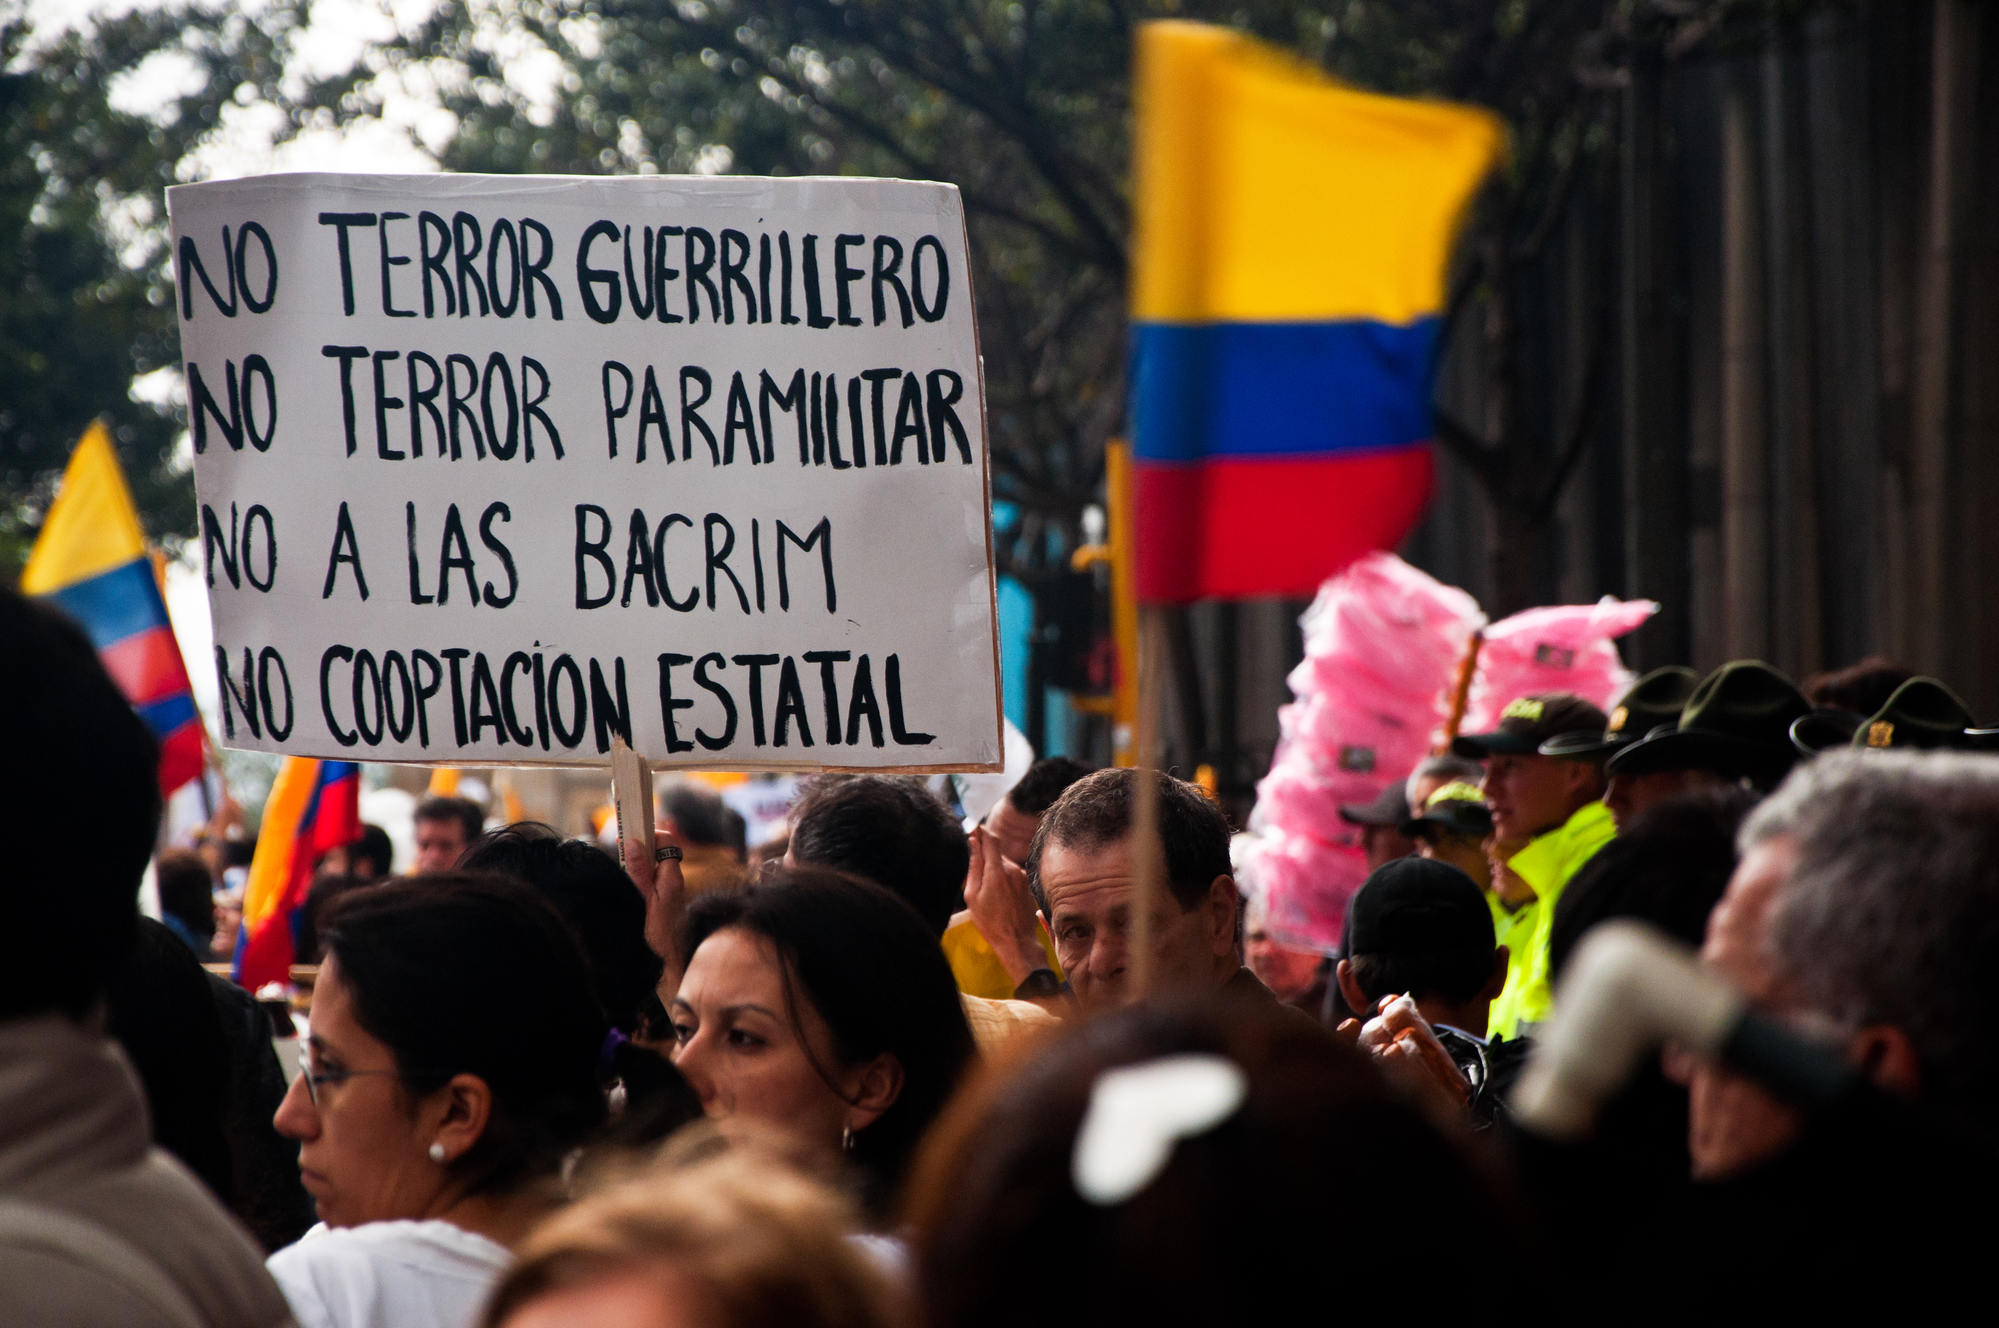 A guide to Colombia’s fragile peace process